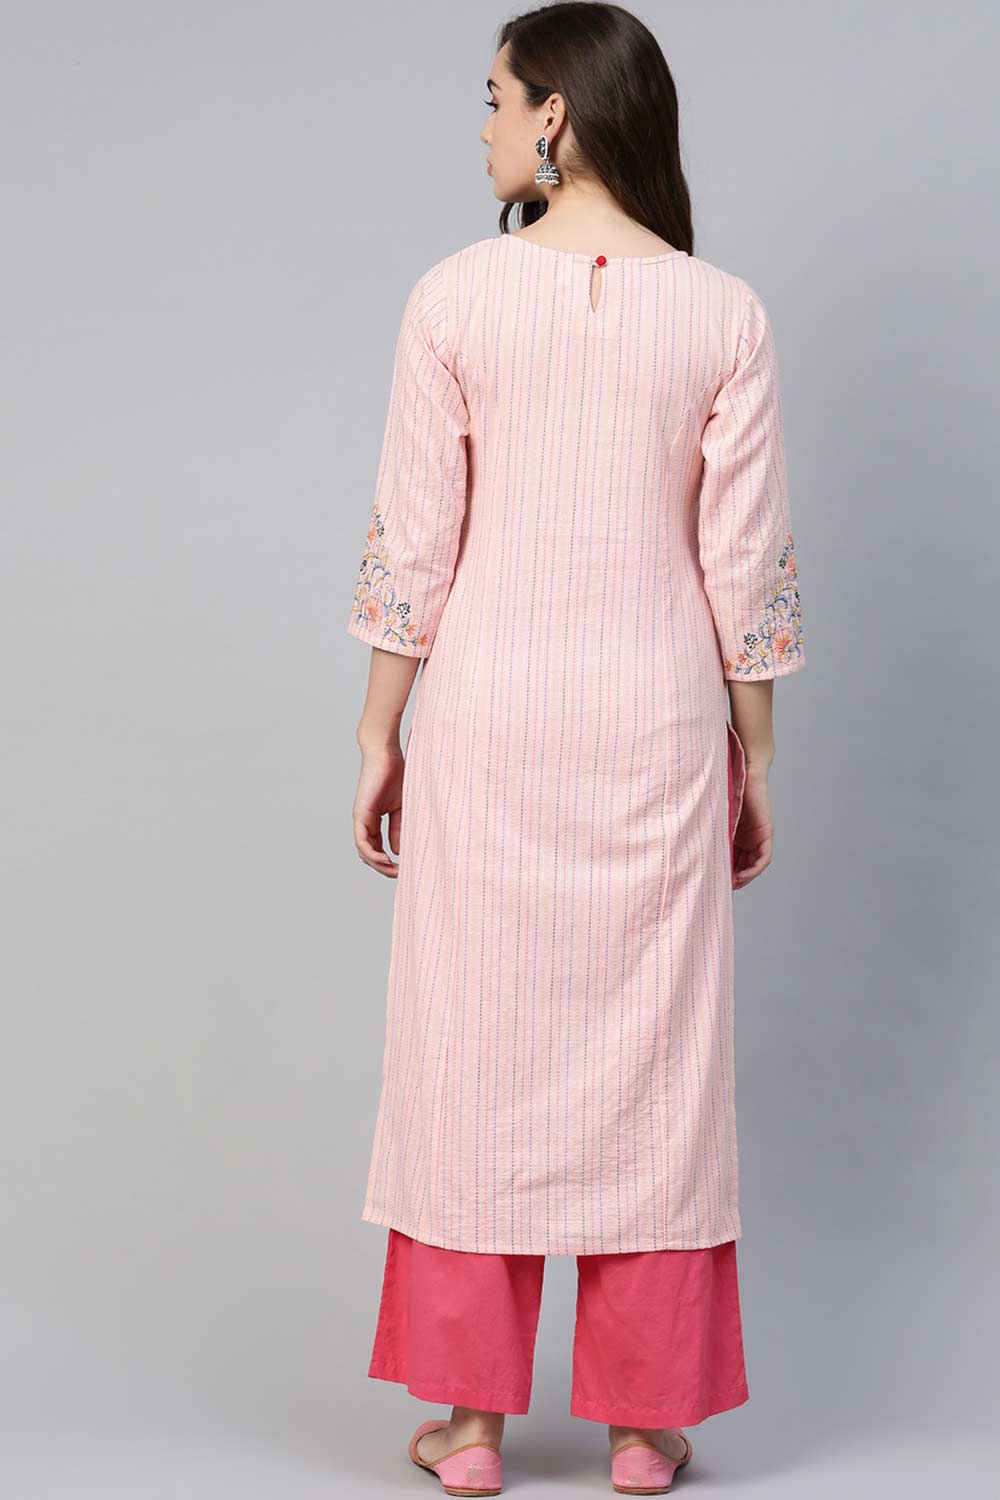 Buy Blended Cotton Embroidered Kurta Top in Pink Online - Front